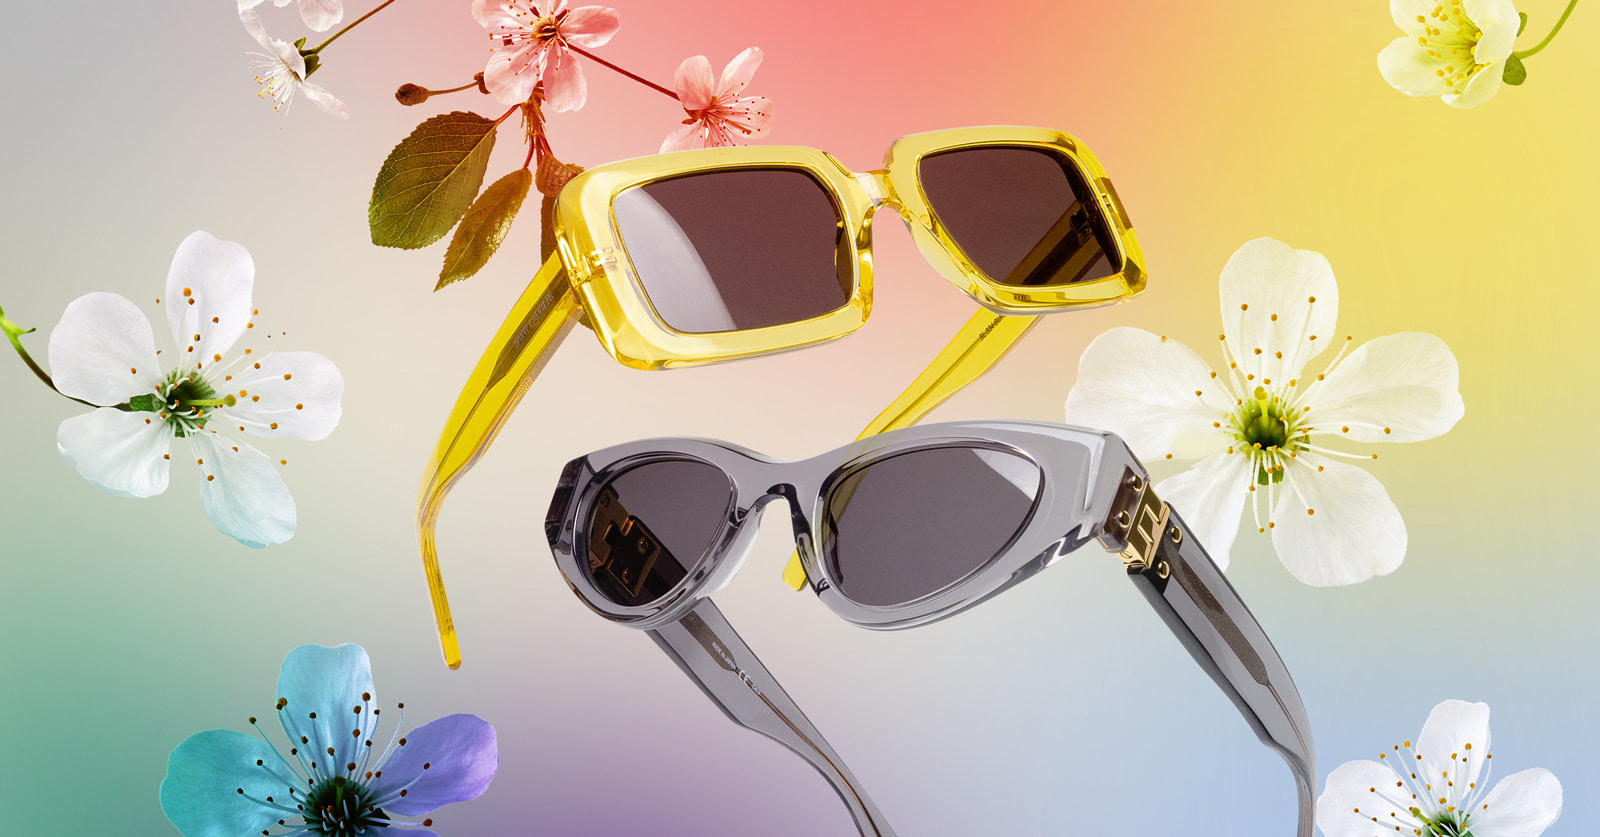 Colorful sunglasses are on trend for spring 2022